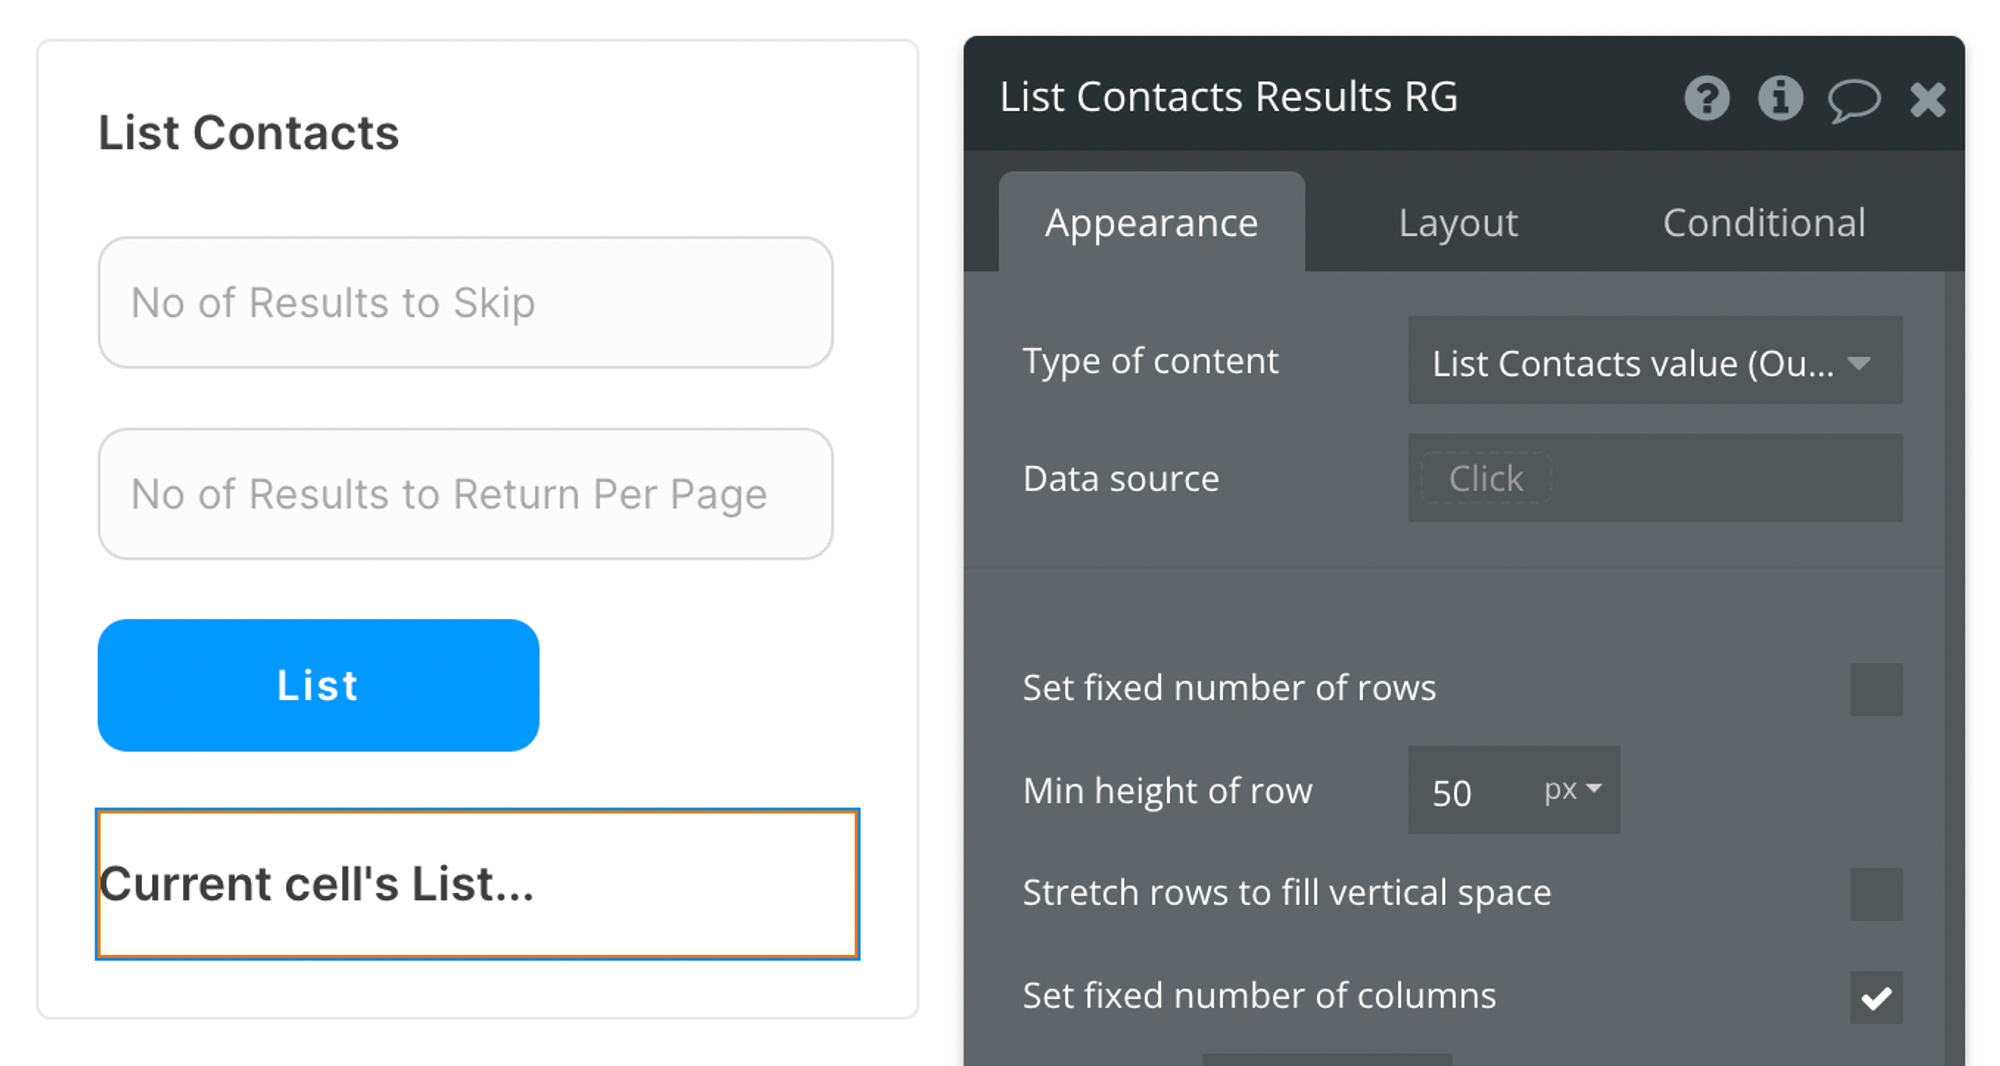 Select List Contacts value (Outlook) from the list of content types